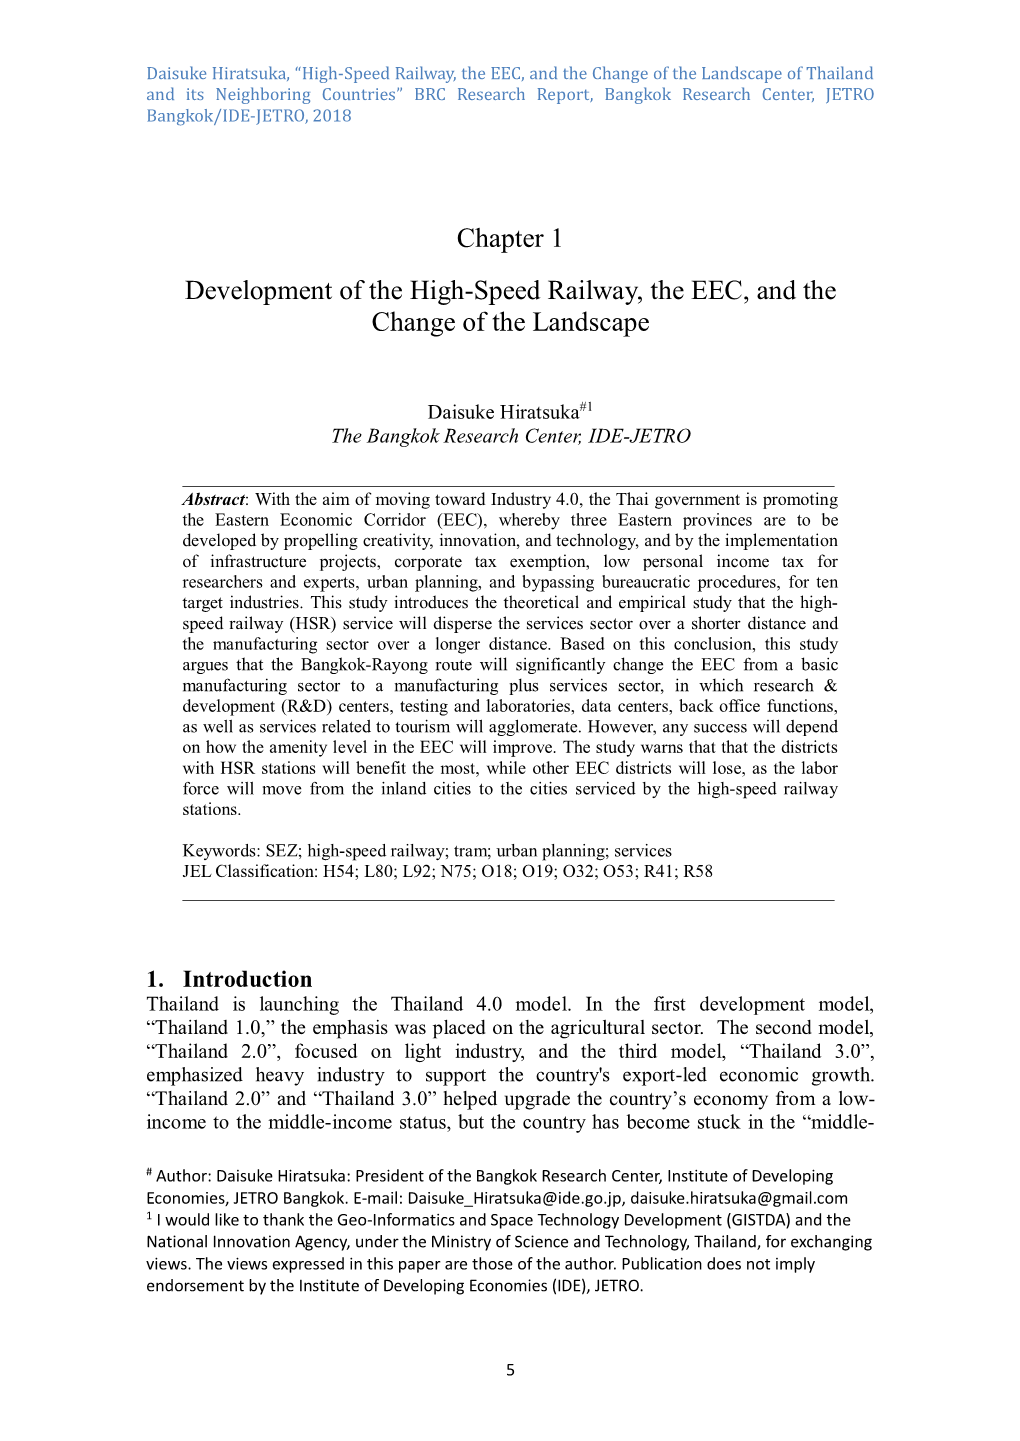 Development of the High-Speed Railway, the EEC, and the Change of the Landscape